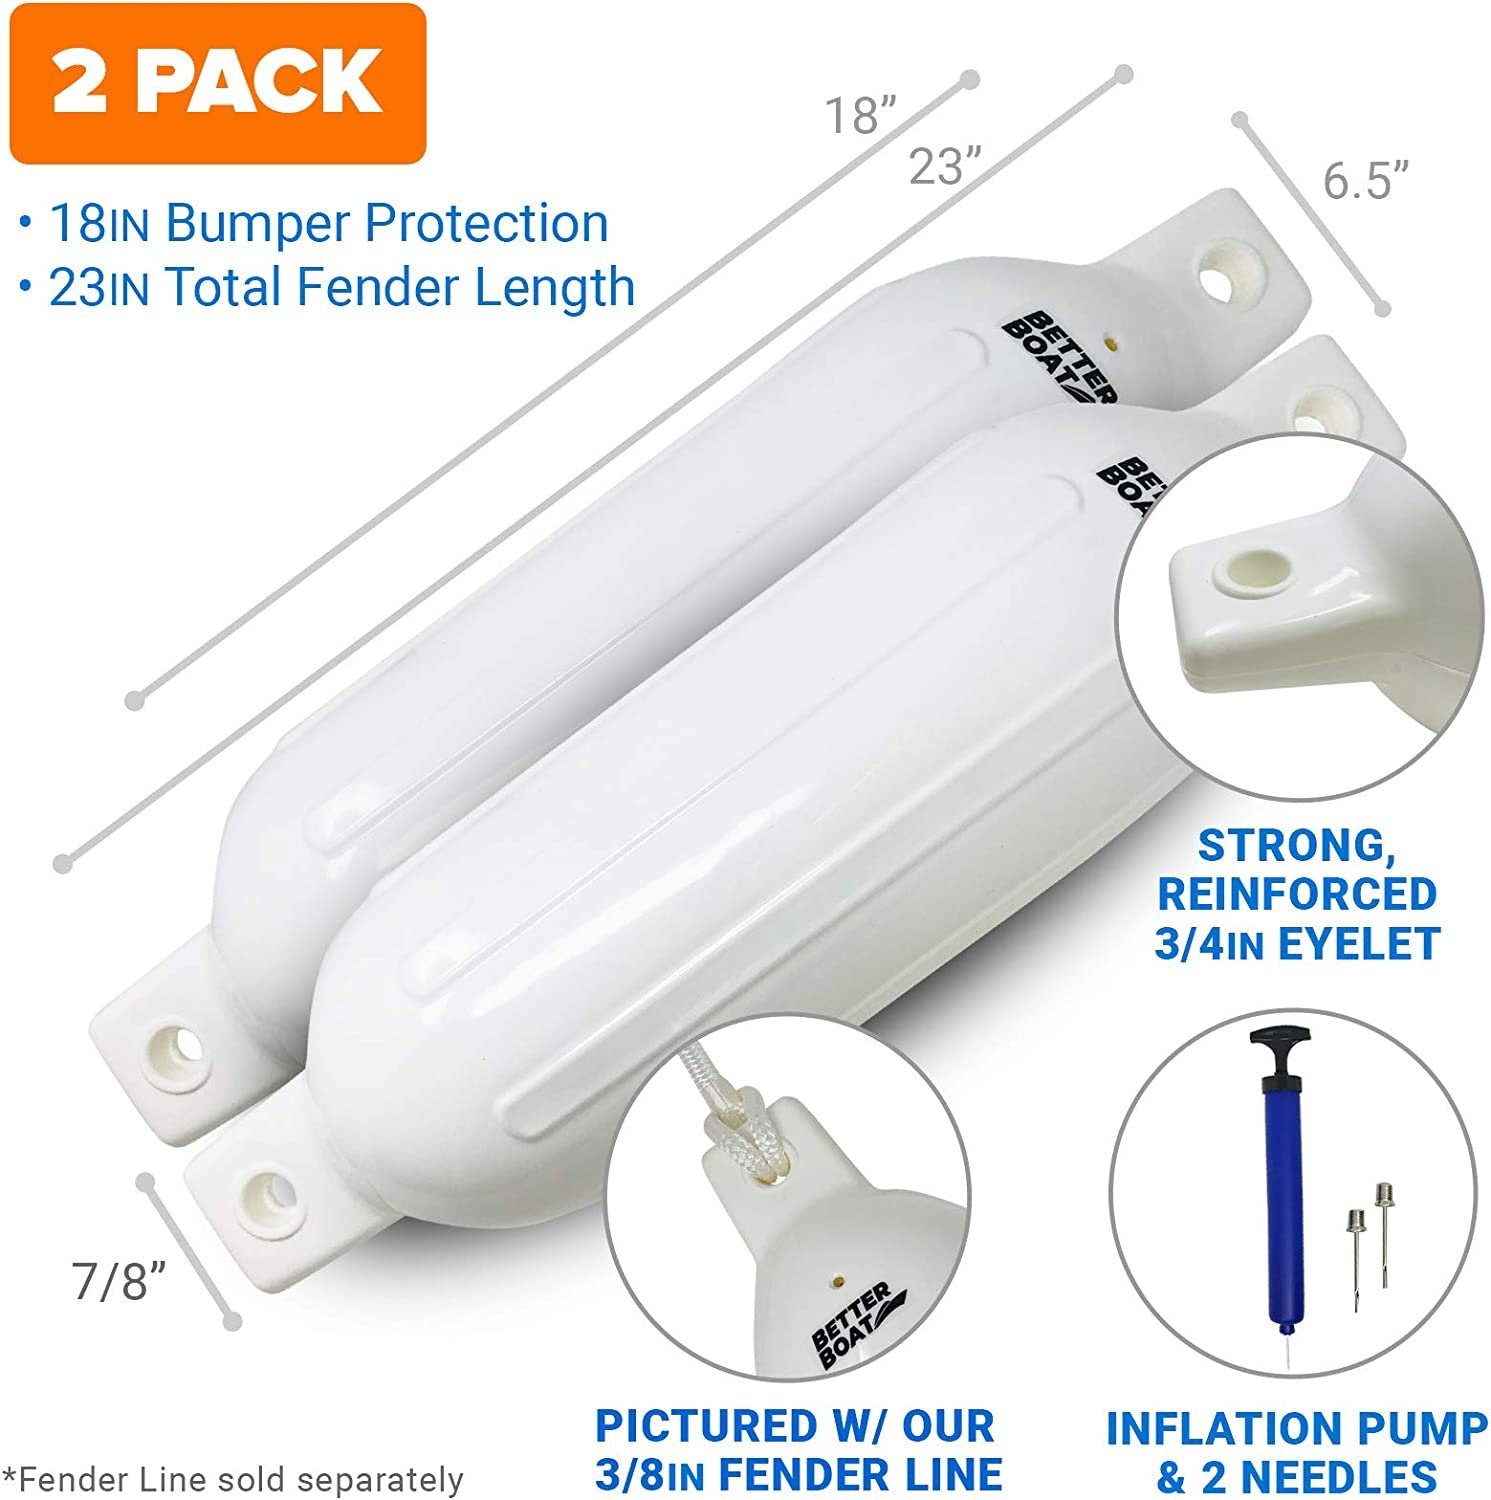 2-Pack 23 x 6.5 Inflatable Boat Fenders - White - Free Pump - Marine Dock Bumpers